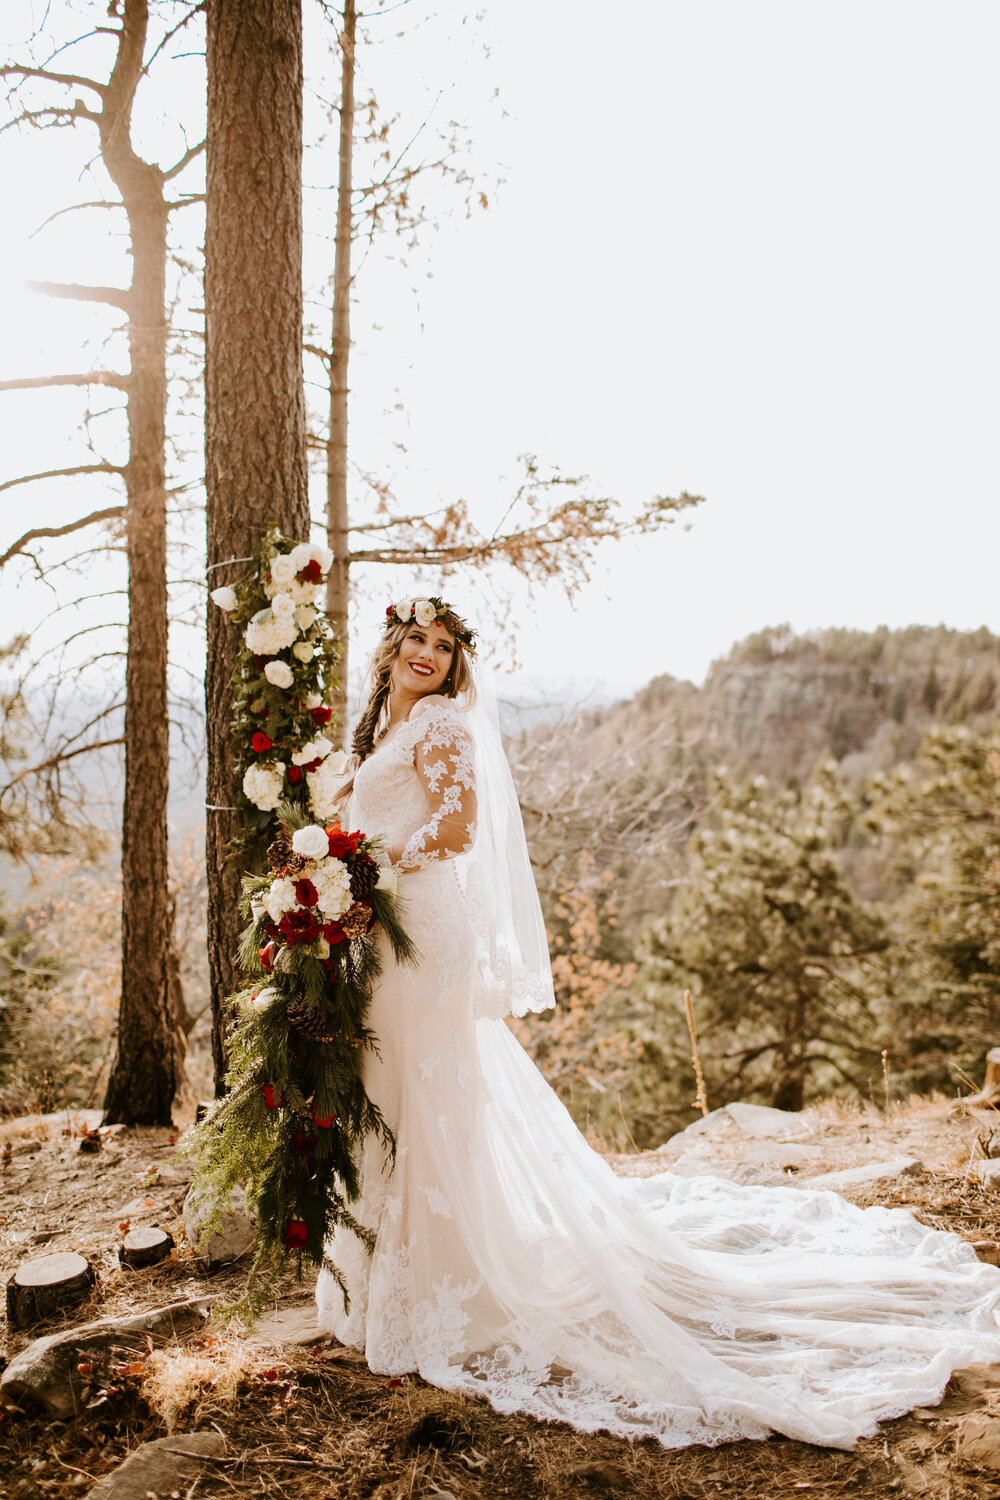 Winter Forest Party | Styled Shoot. Desktop Image